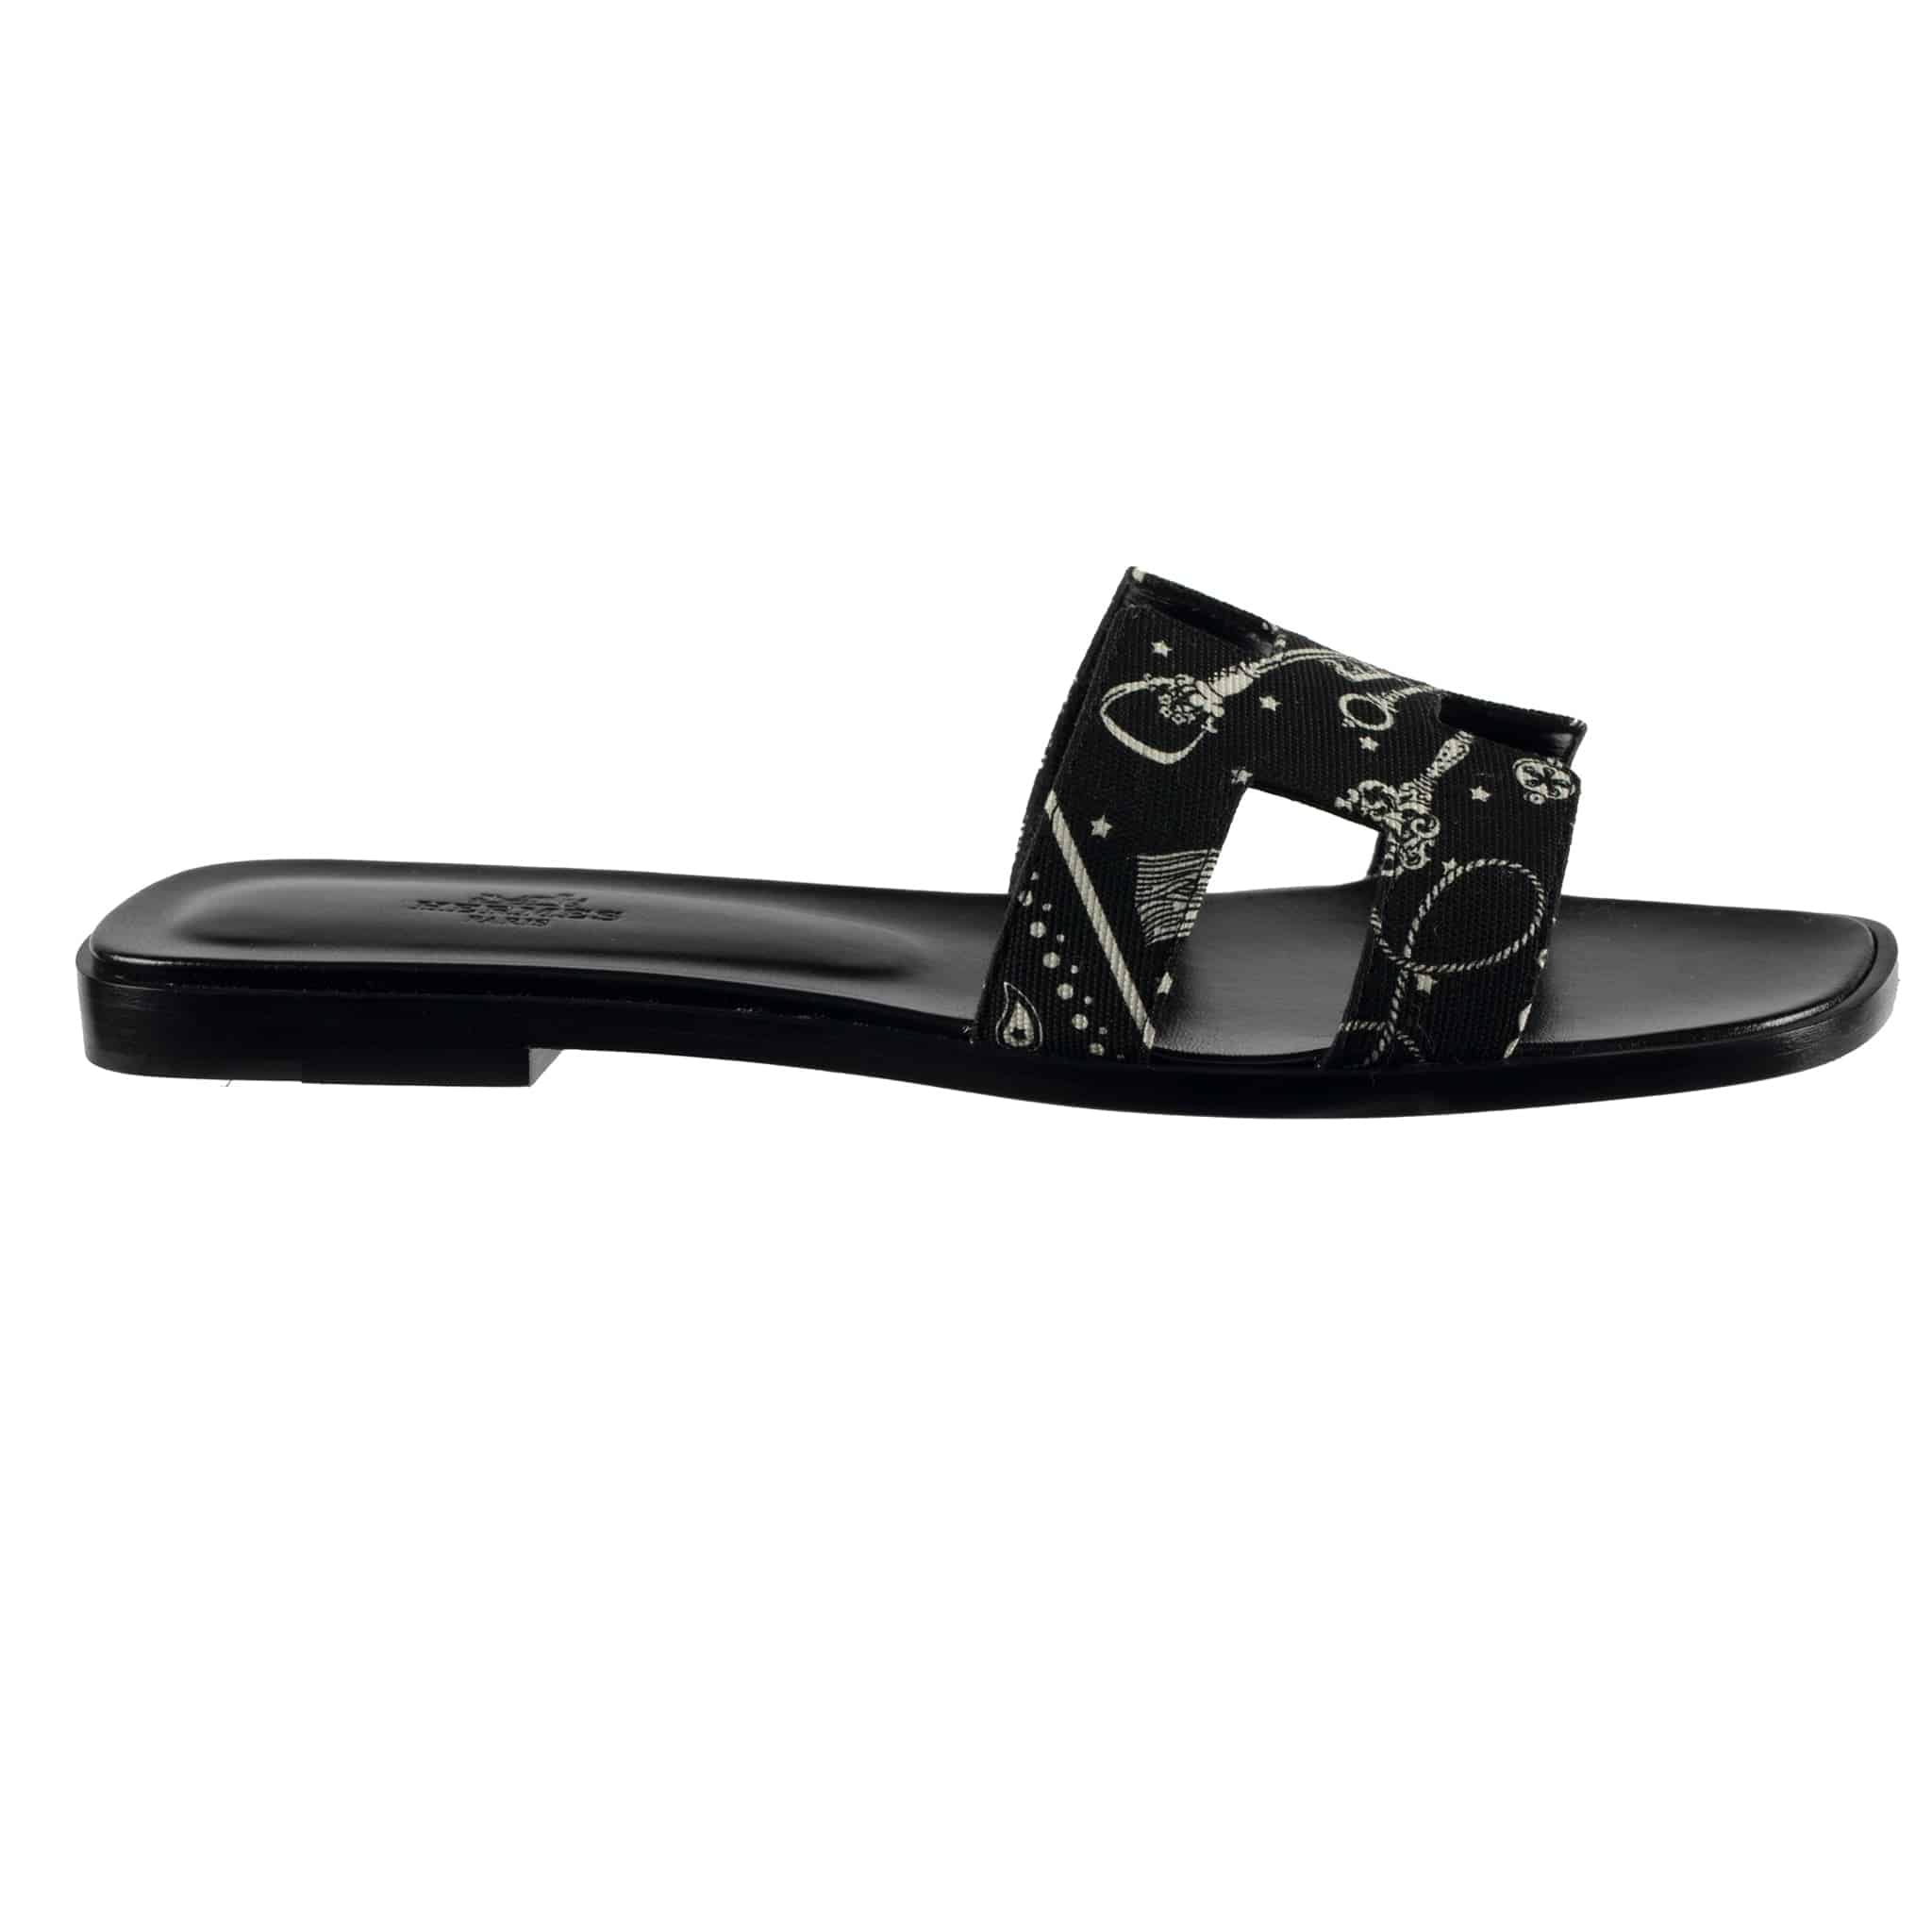 HERMES ORAN SANDAL BLACK SMOOTH LEATHER WITH CANVAS PATTERN 38 FR - On Repeat